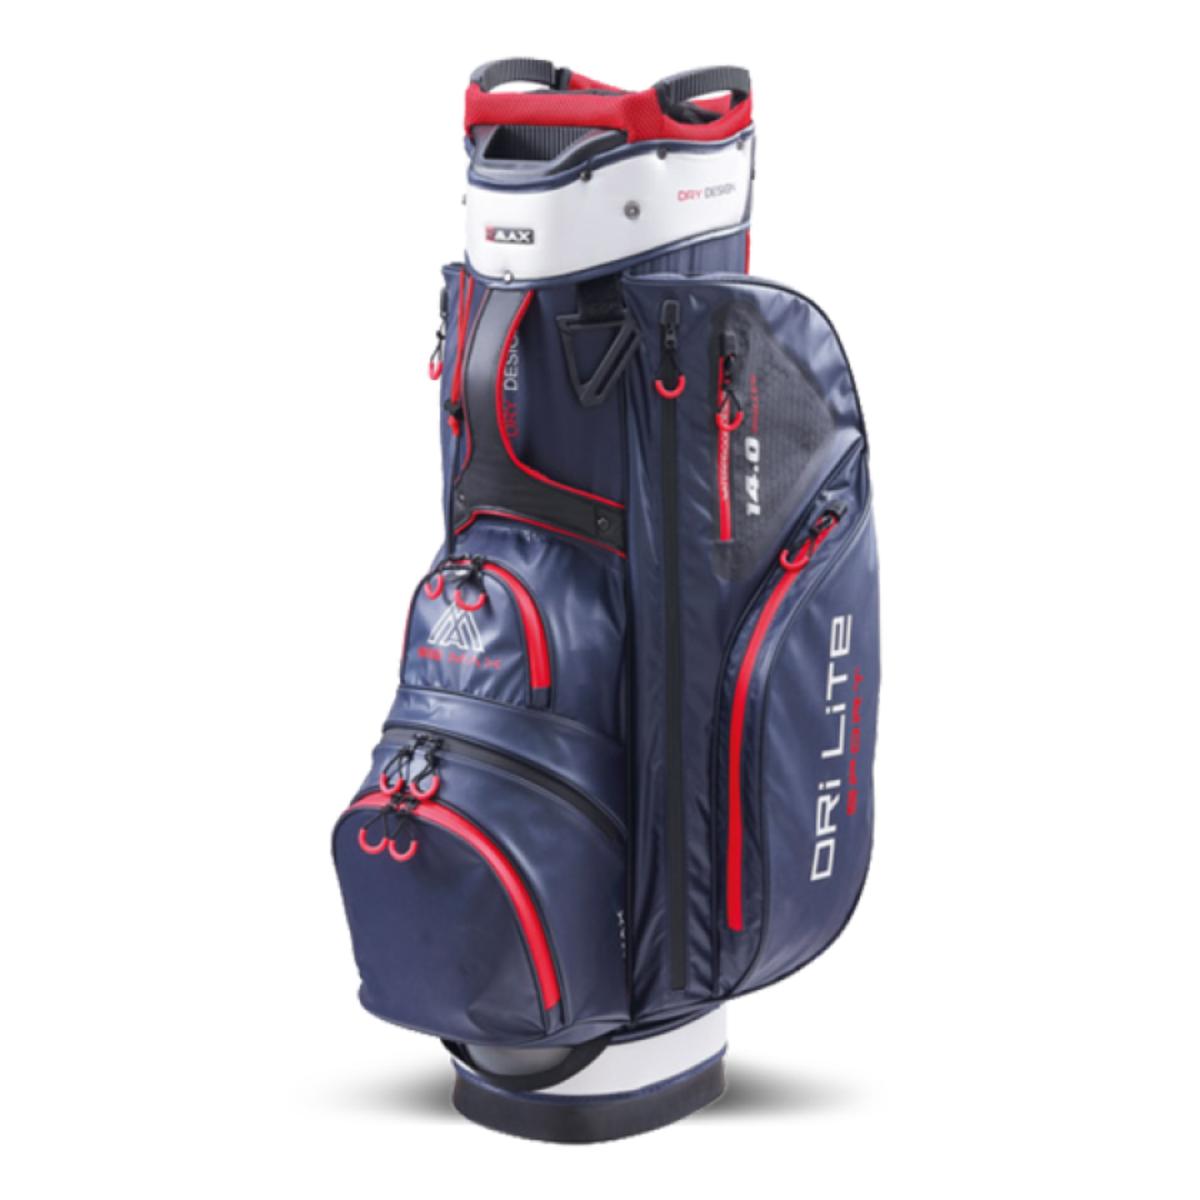 Big Max's Dri Lite Sport 14.0 Series cart bag weighs just 4.4 pounds and comes with a bevy of innovative pocket functionalities, along with a stylish European look. 